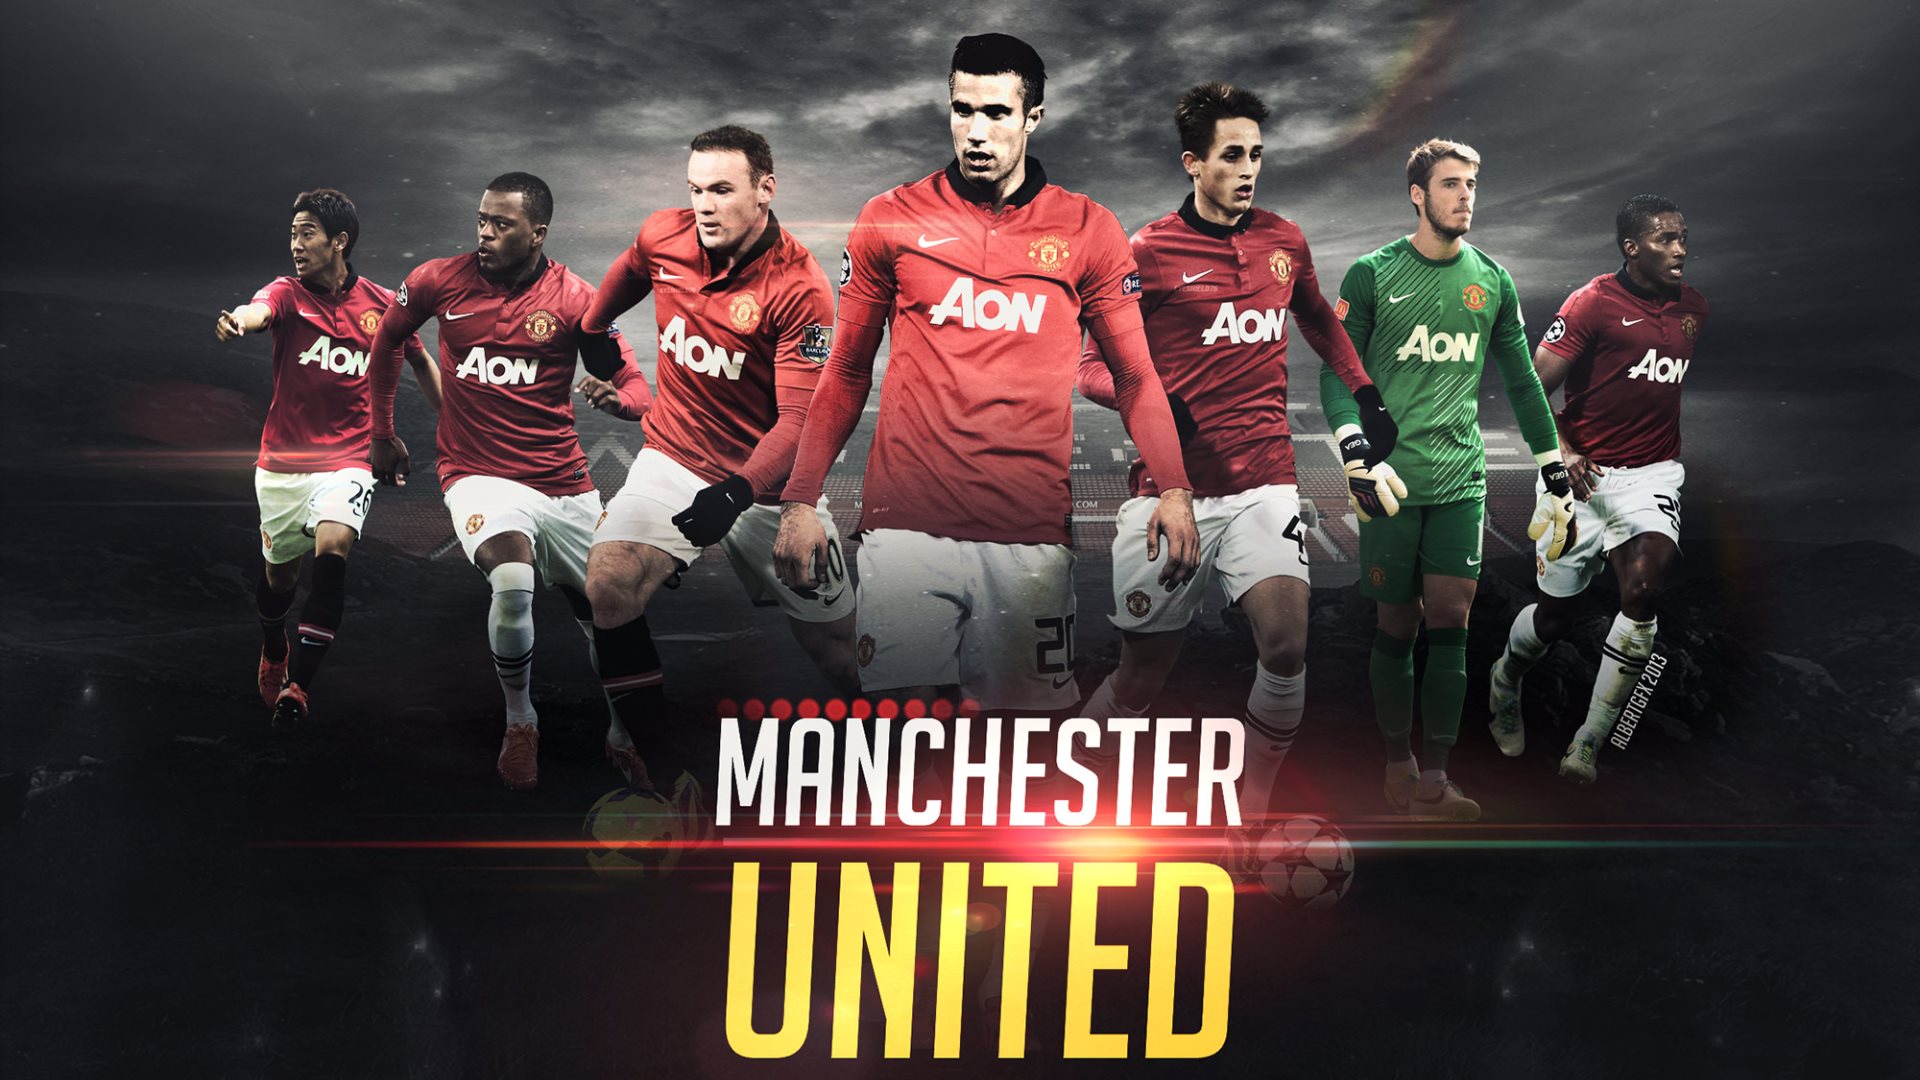 Manchester United In Flag English Wallpaper HD